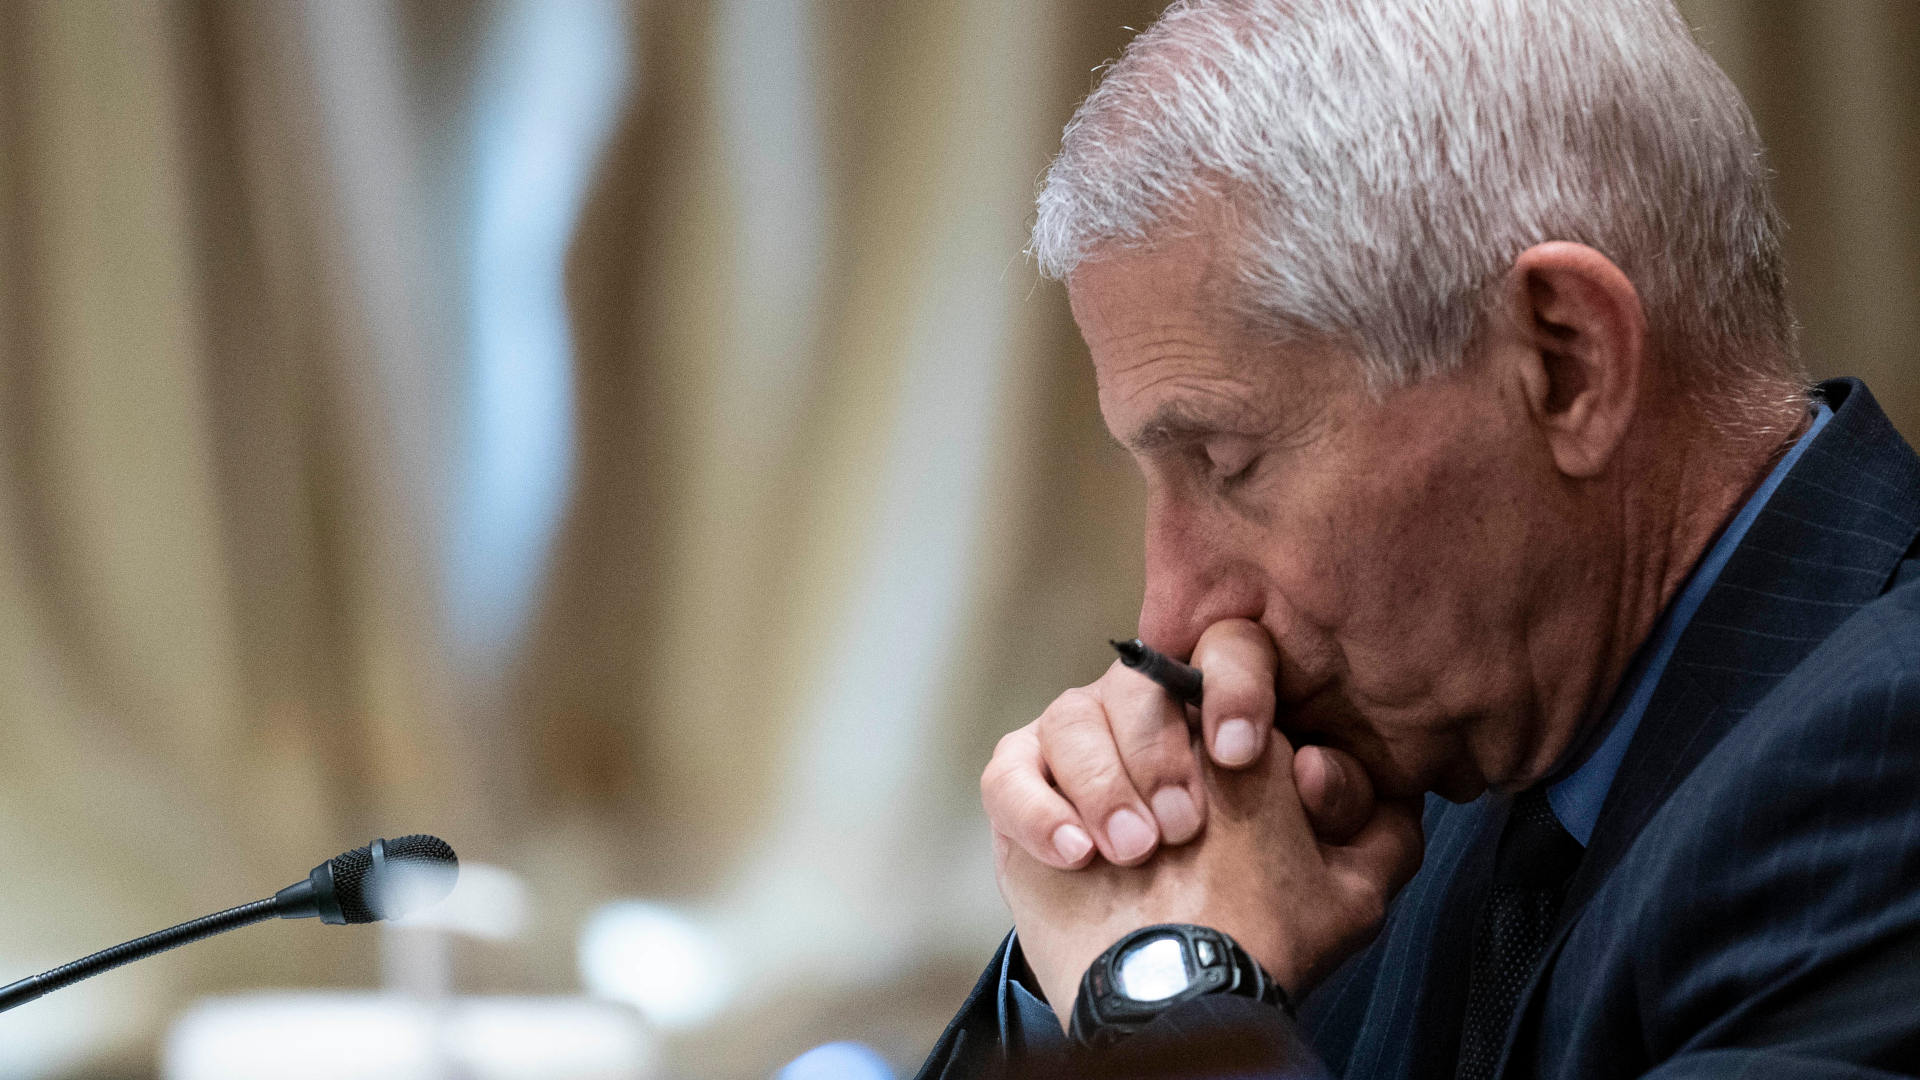 Anthony Fauci listens during a Senate hearing looking into the state of medical research and budget estimates for the National Institutes of Health in May 2021.